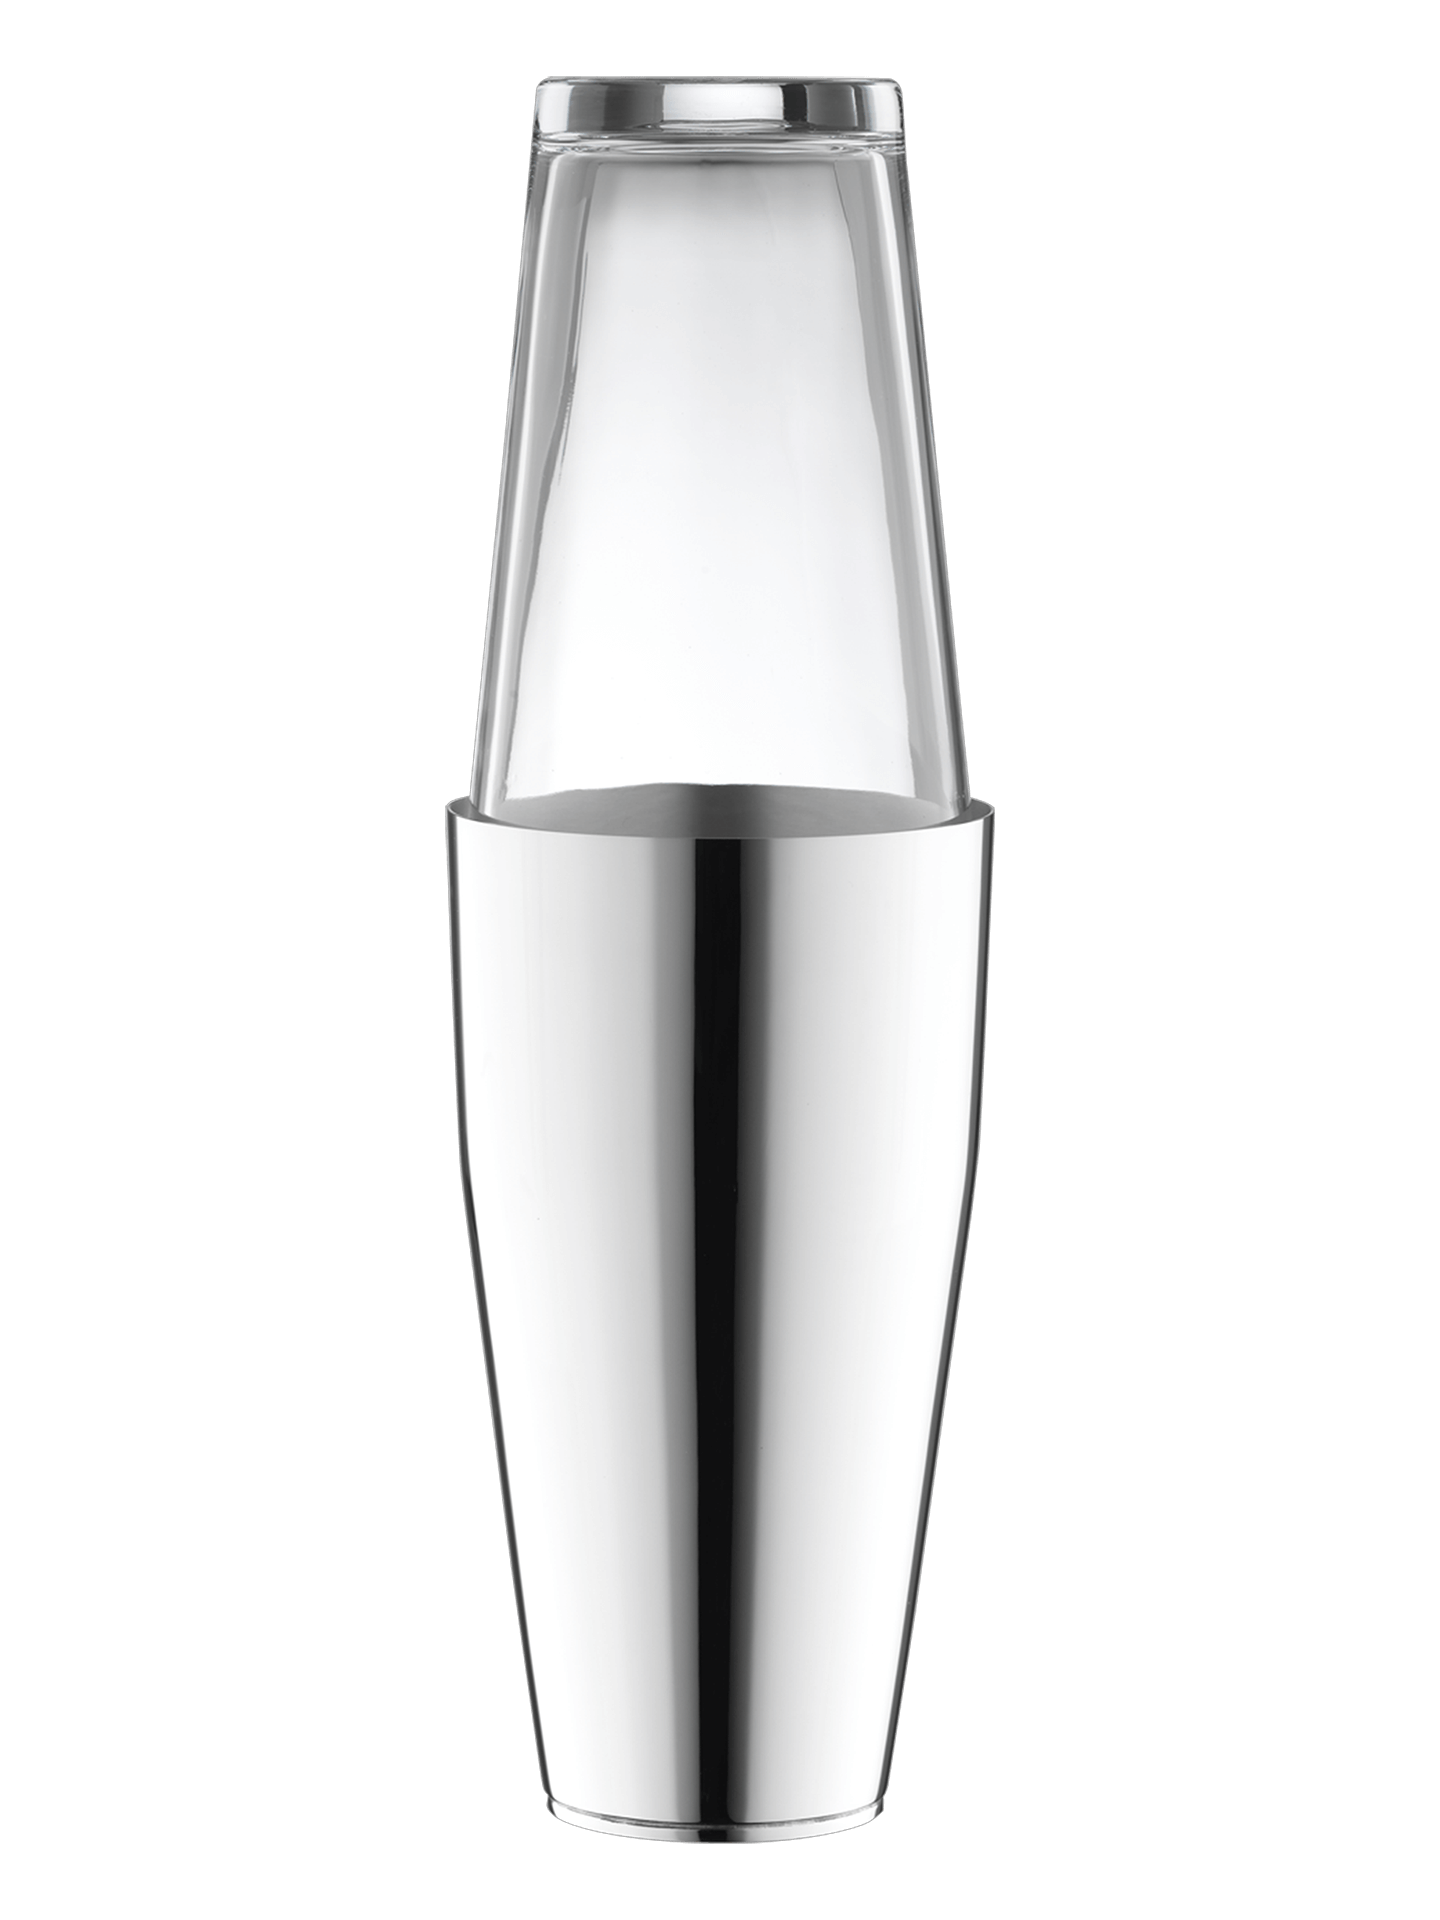 Dante Cocktail shaker with glass (90g silverplated)